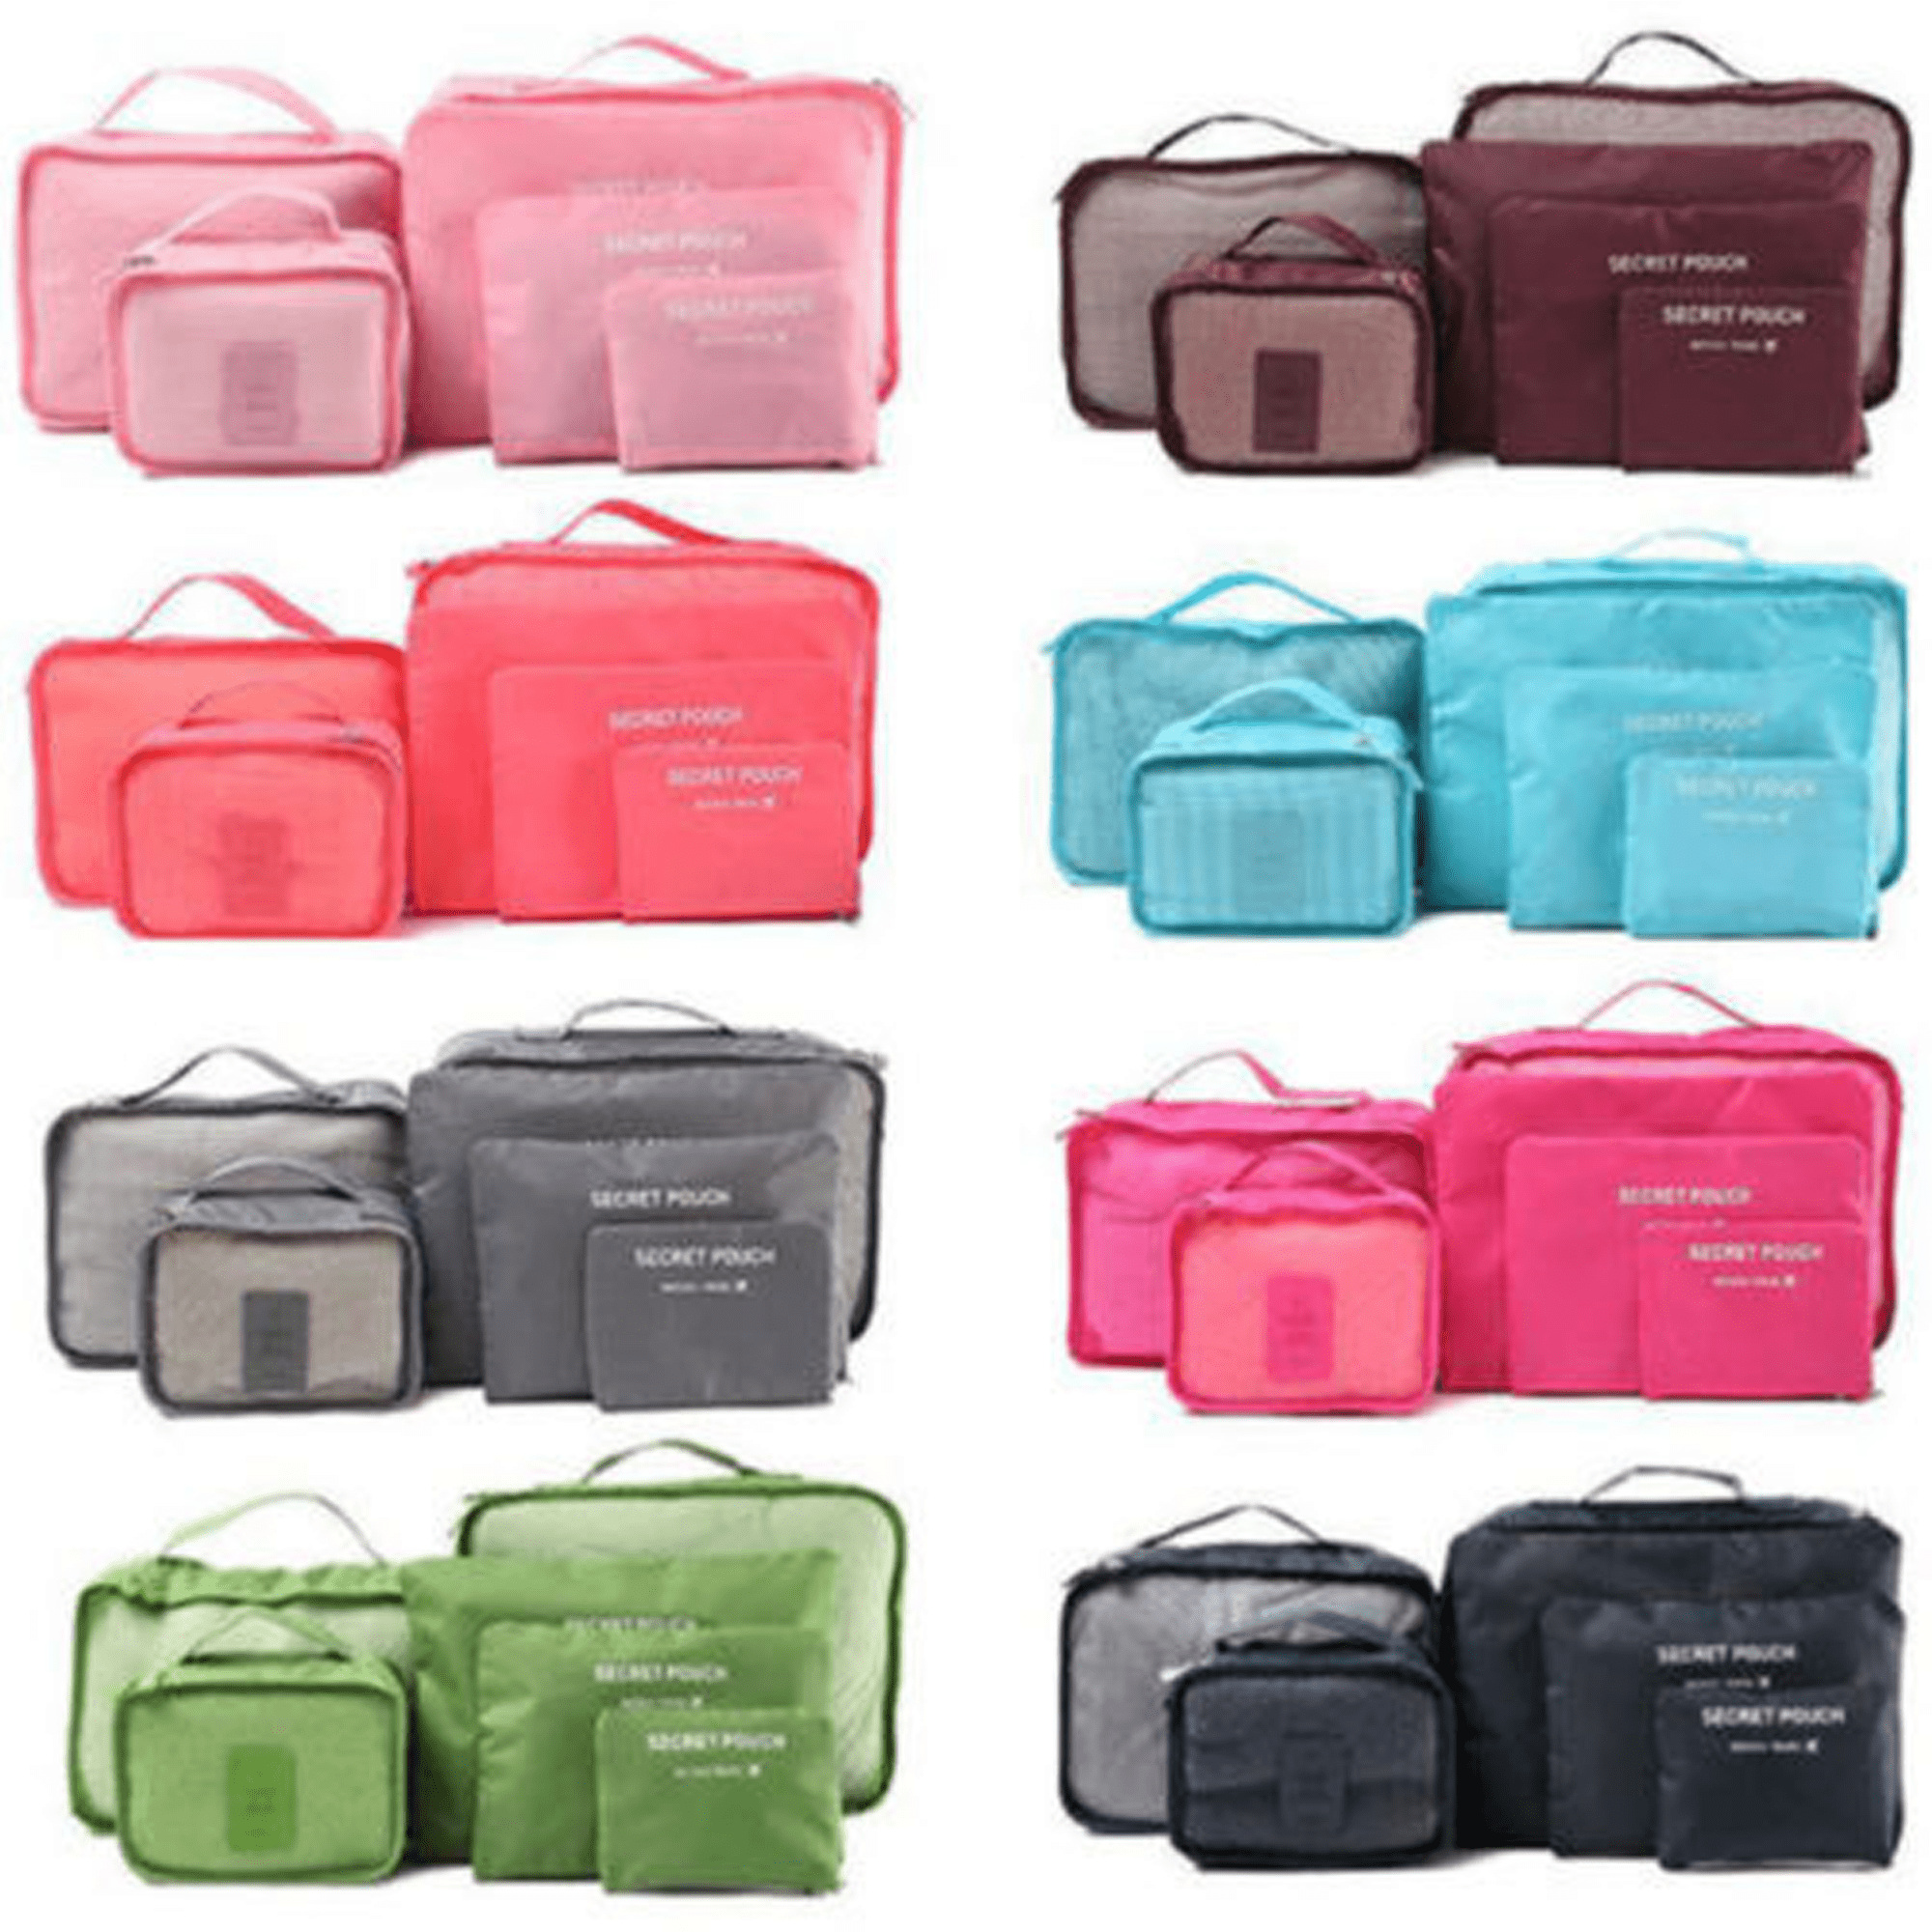 6 in 1 Travel Luggage Bag Organizer Storage Bag Set Foldable Waterproof  Travel Pouch | Shopee Malaysia